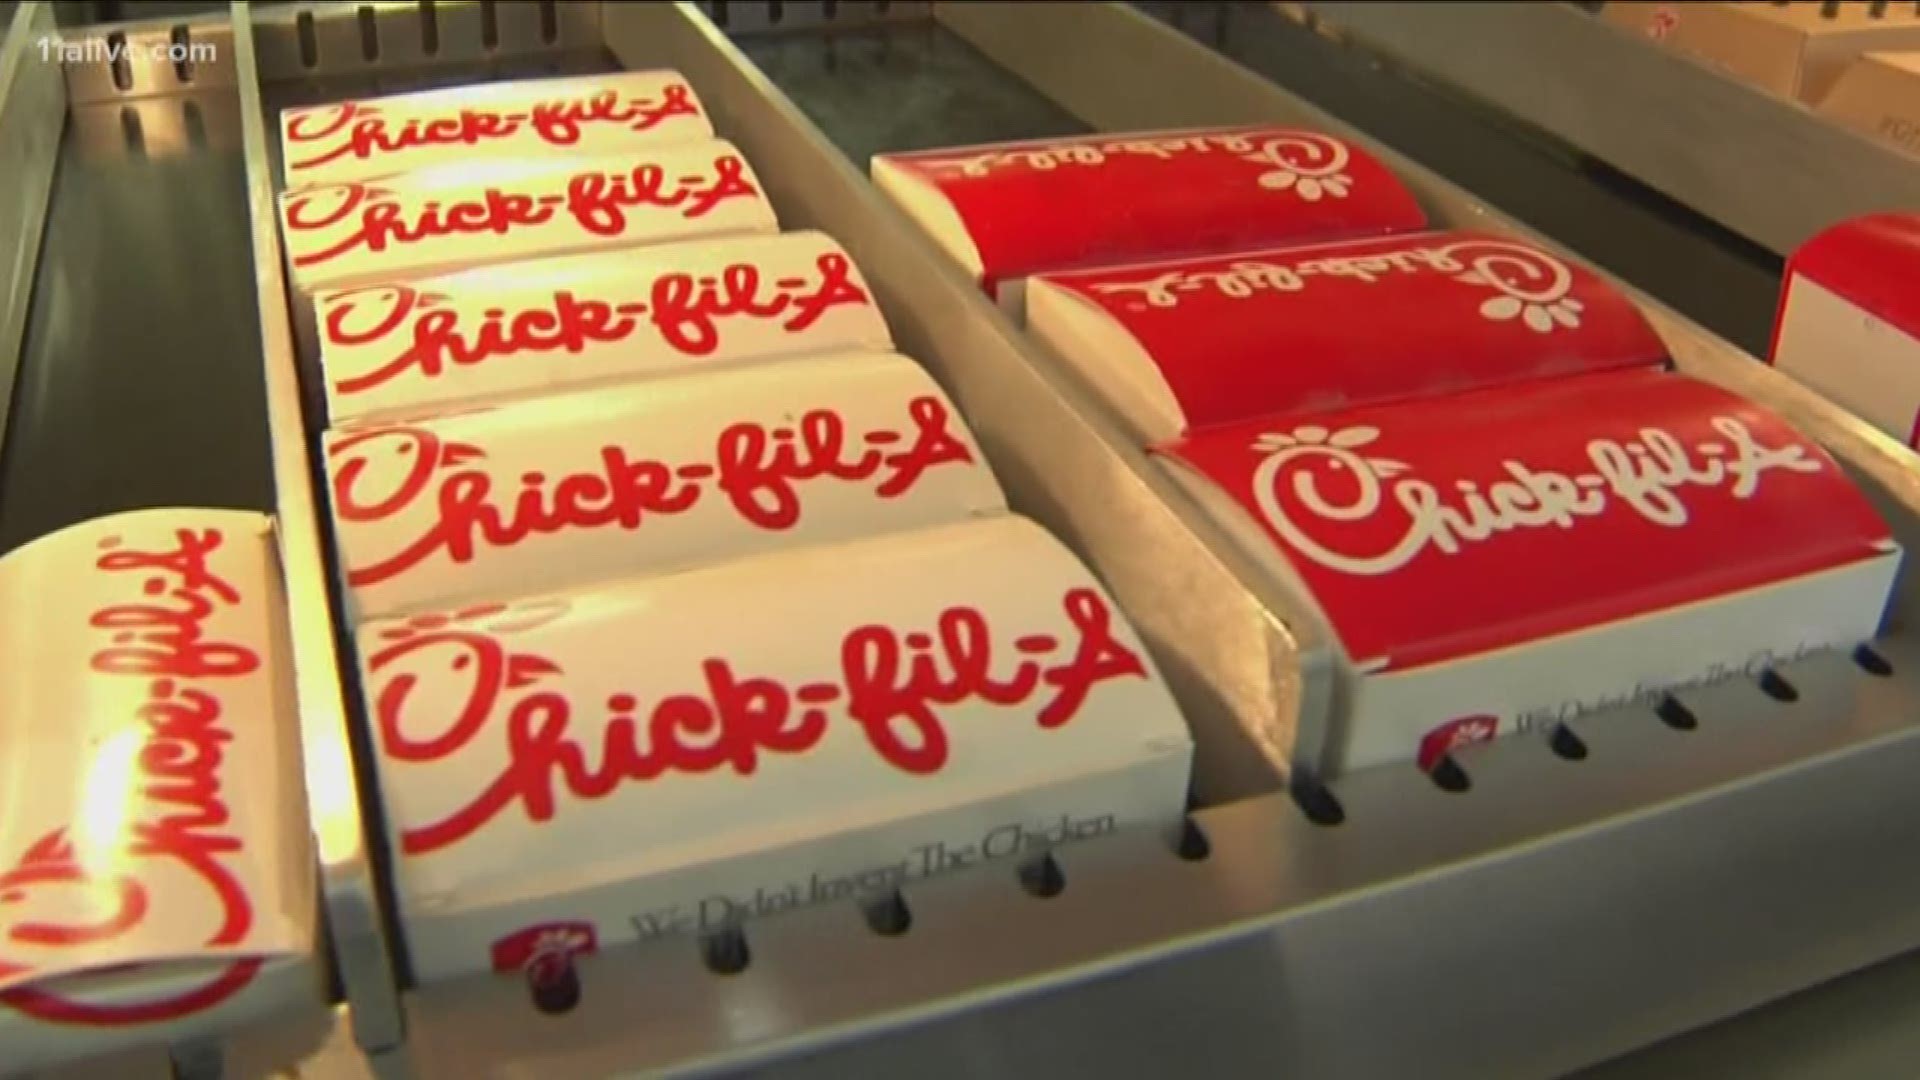 This week, Atlanta Chick-fil-A fans can get a free breakfast item using their app.